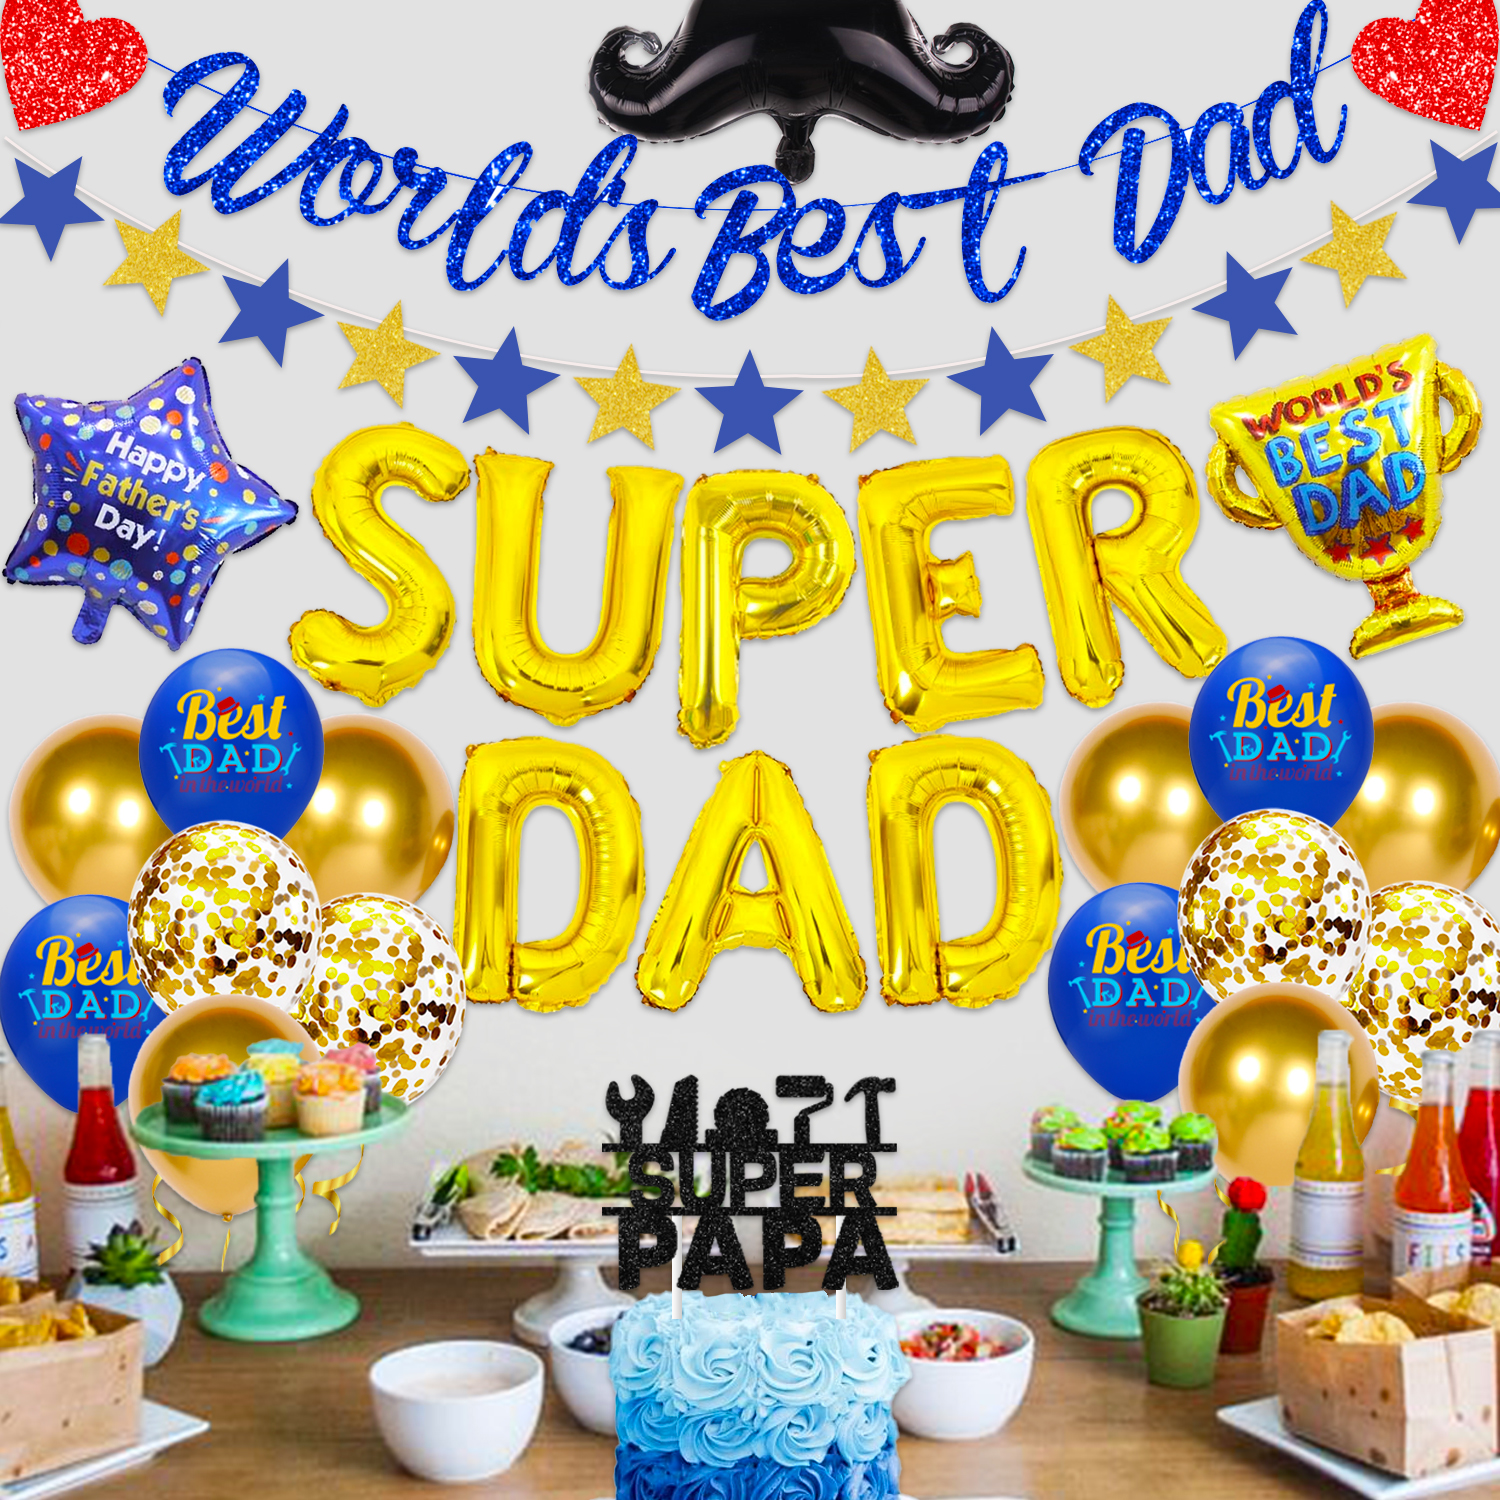 Happy Fathers Day Decorations - Super Dad Decorations for Father Birthday Party - World's Best Dad Banner and Best Dad Balloon - Super Dad Party Supplies for Home - image 2 of 6